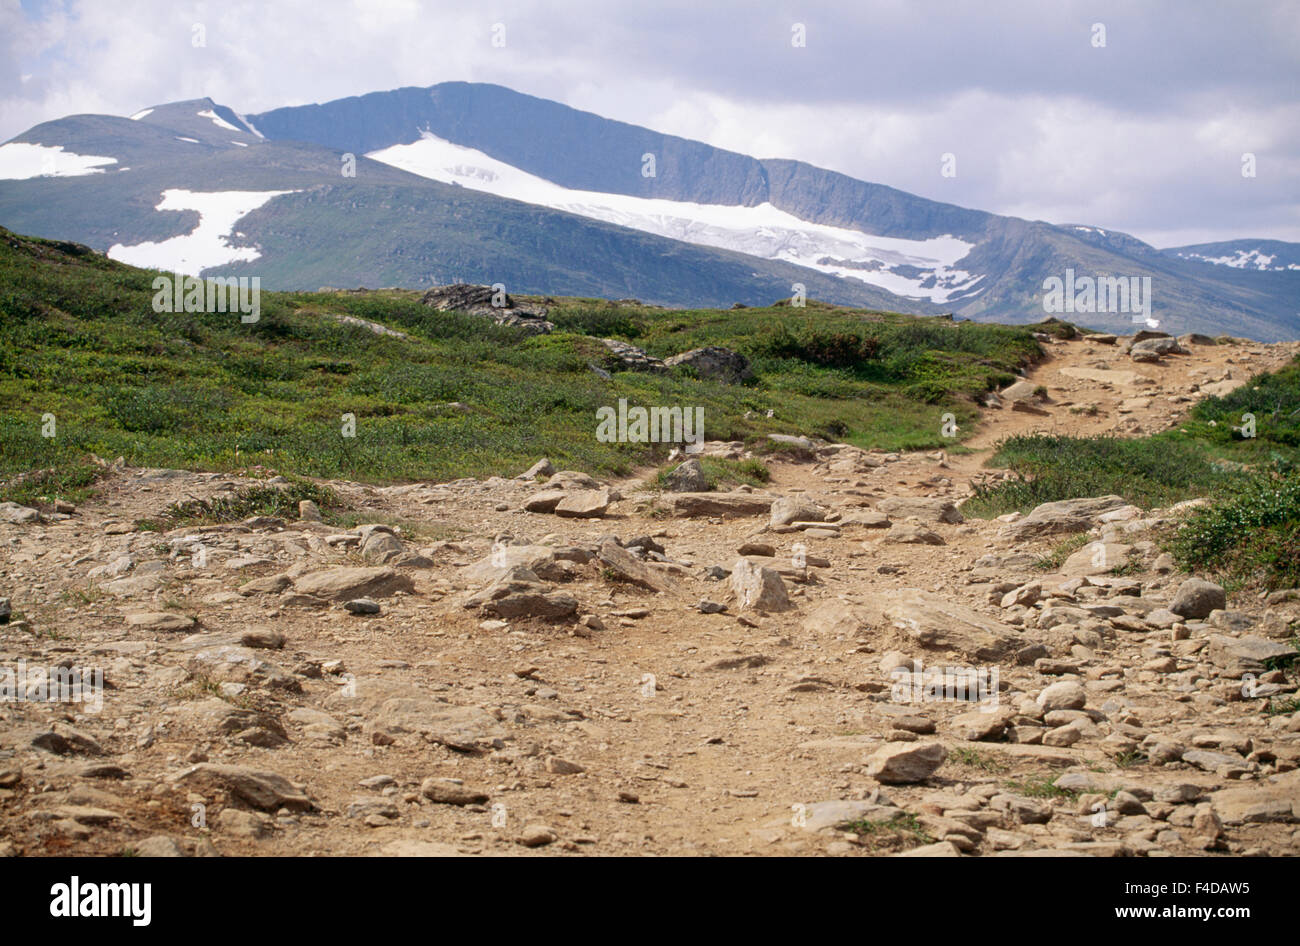 Barren land with mountain range in background Stock Photo